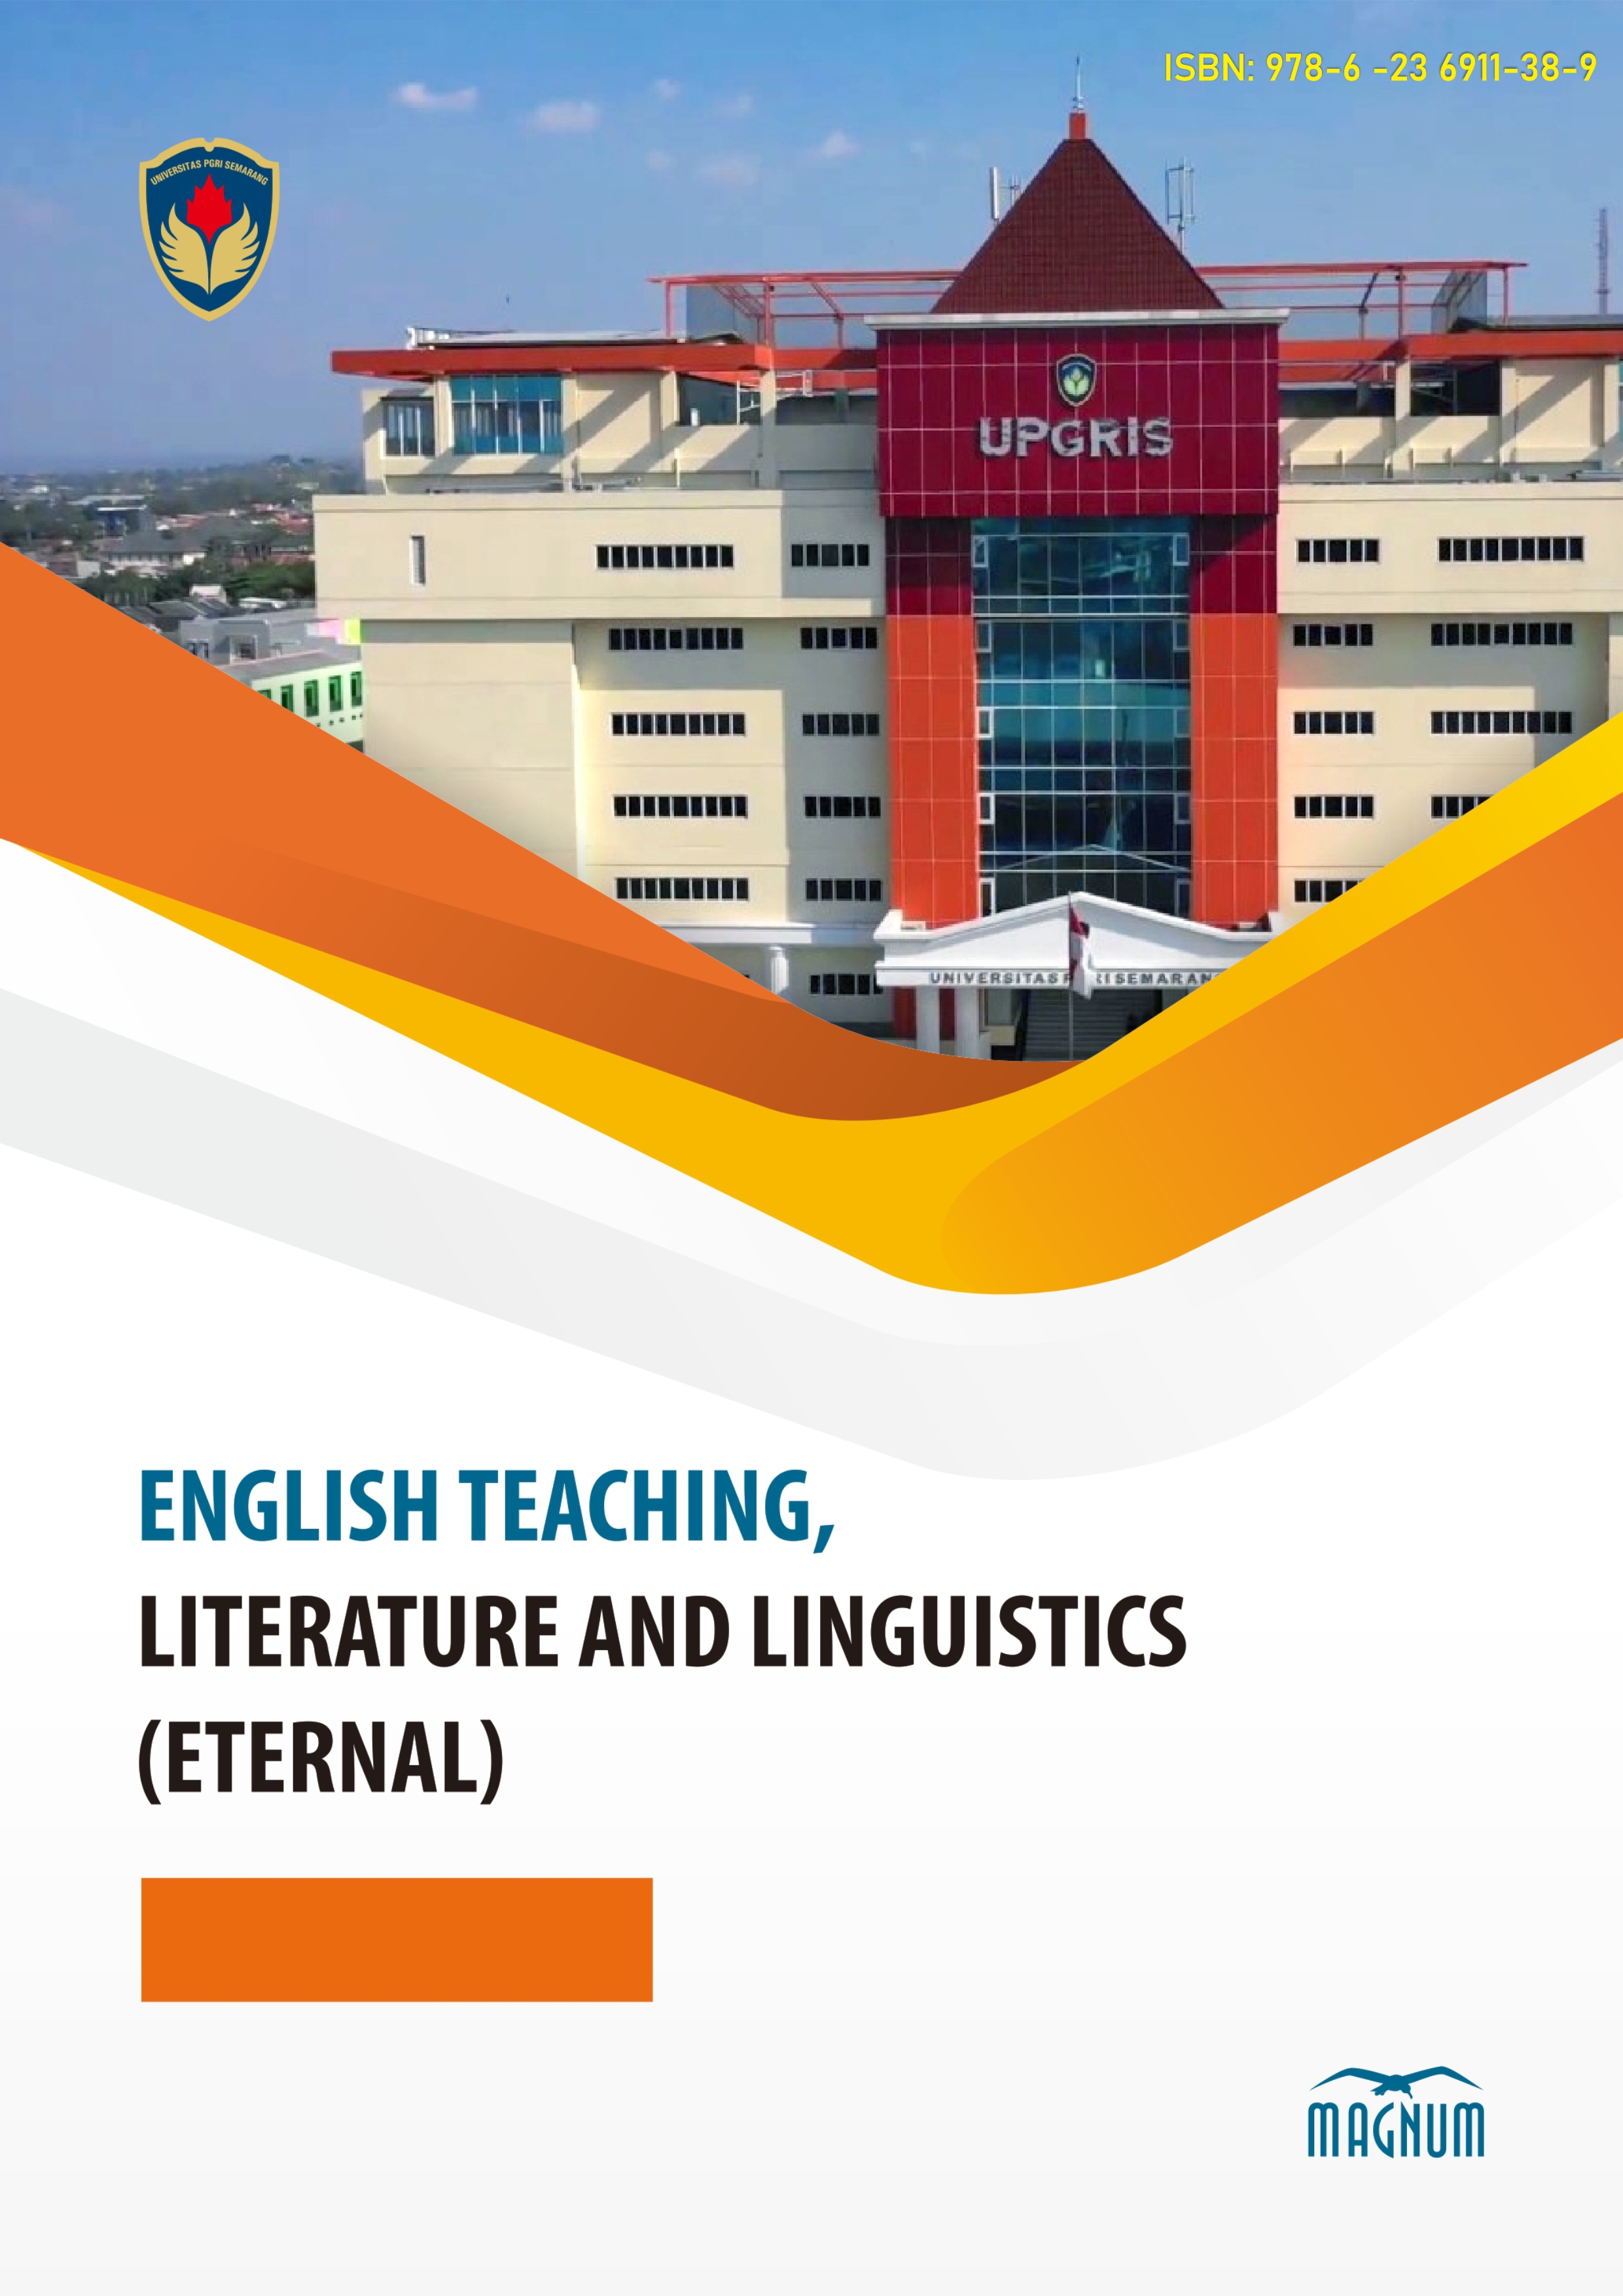 					View Vol. 1 No. 1 (2021): PROCEEDING OF ENGLISH TEACHING, LITERATURE AND LINGUISTICS (ETERNAL) CONFERENCE
				